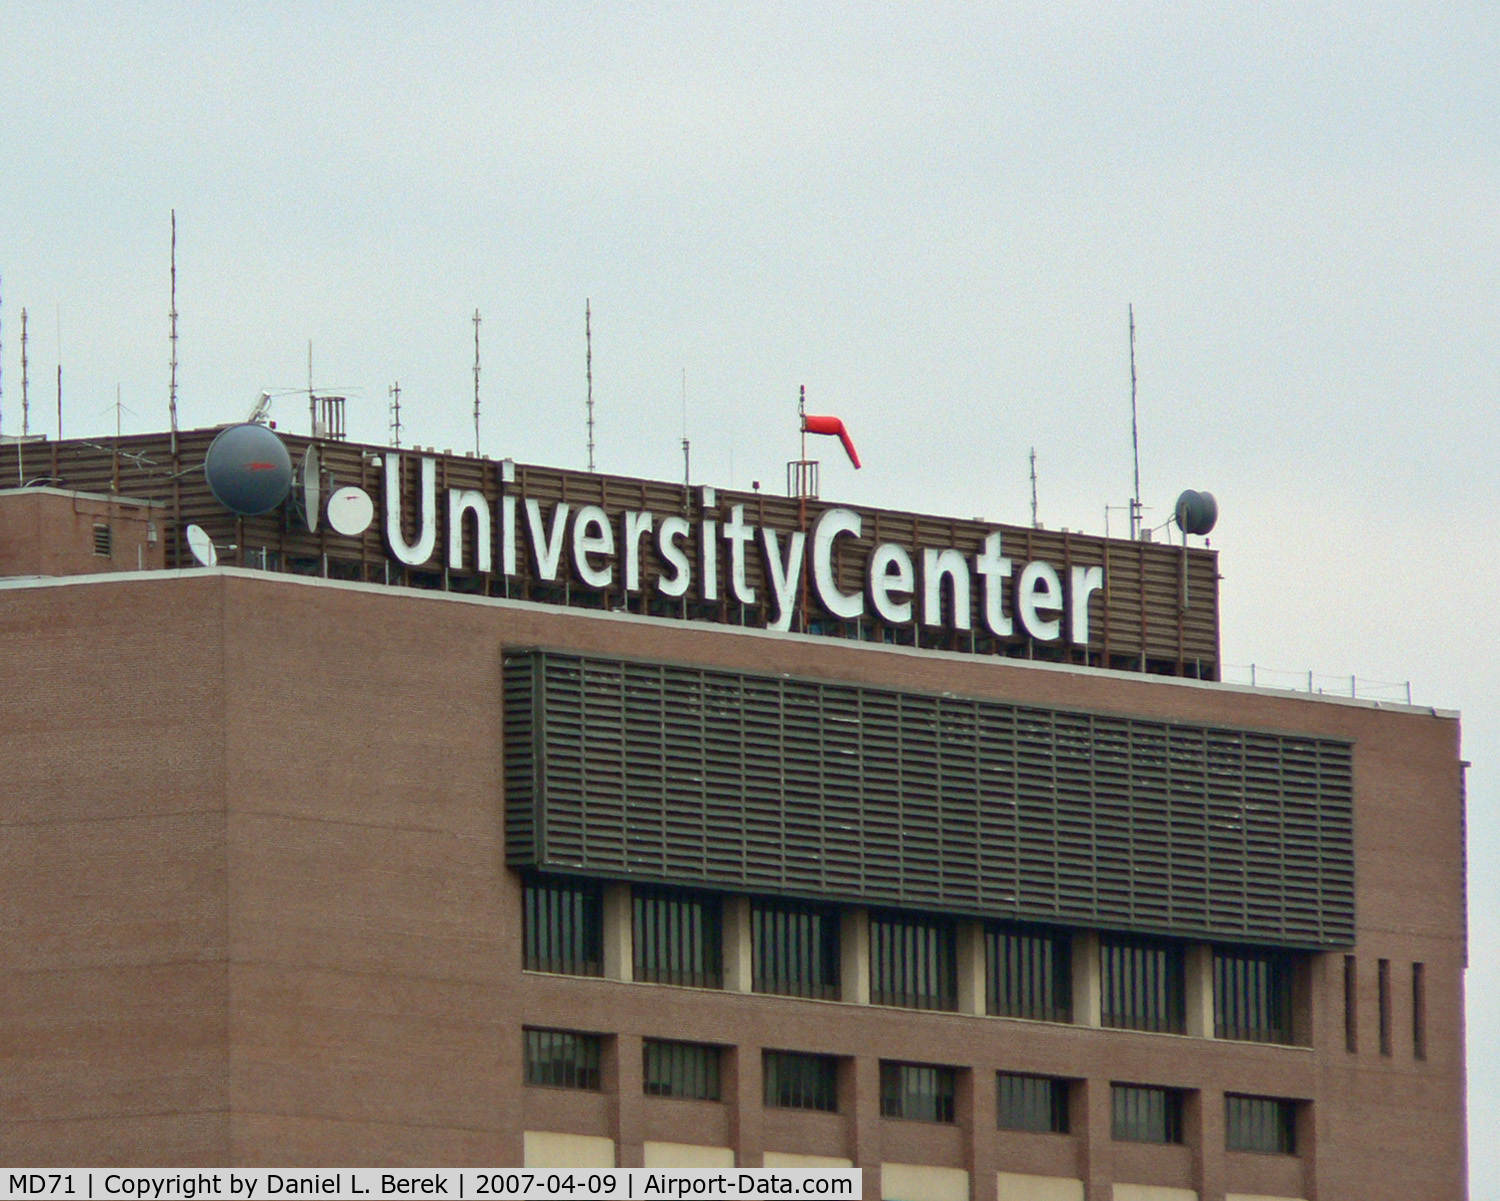 University Of Maryland Shock Trauma Center Heliport (MD71) - This heliport stands prominently in the City of Baltimore.